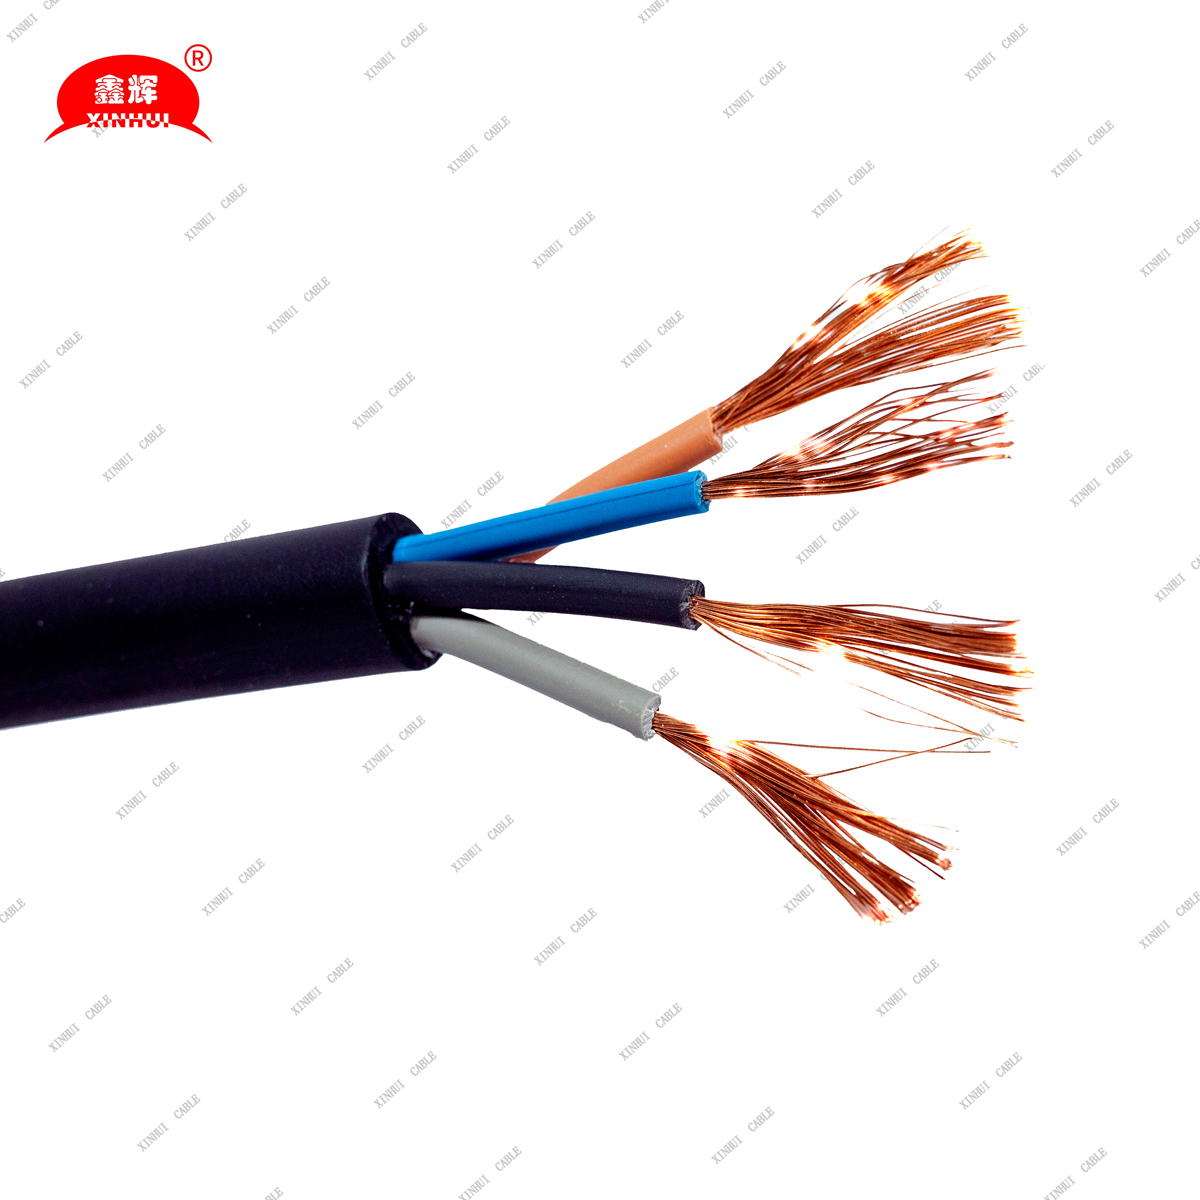 KVV Copper Core PVC Insulated PVC Sheathed KVV Cable 450/750 4-37 0.75-10 Laid Indoors in Fixed Locations Such As Cable Trenches And Pipelines